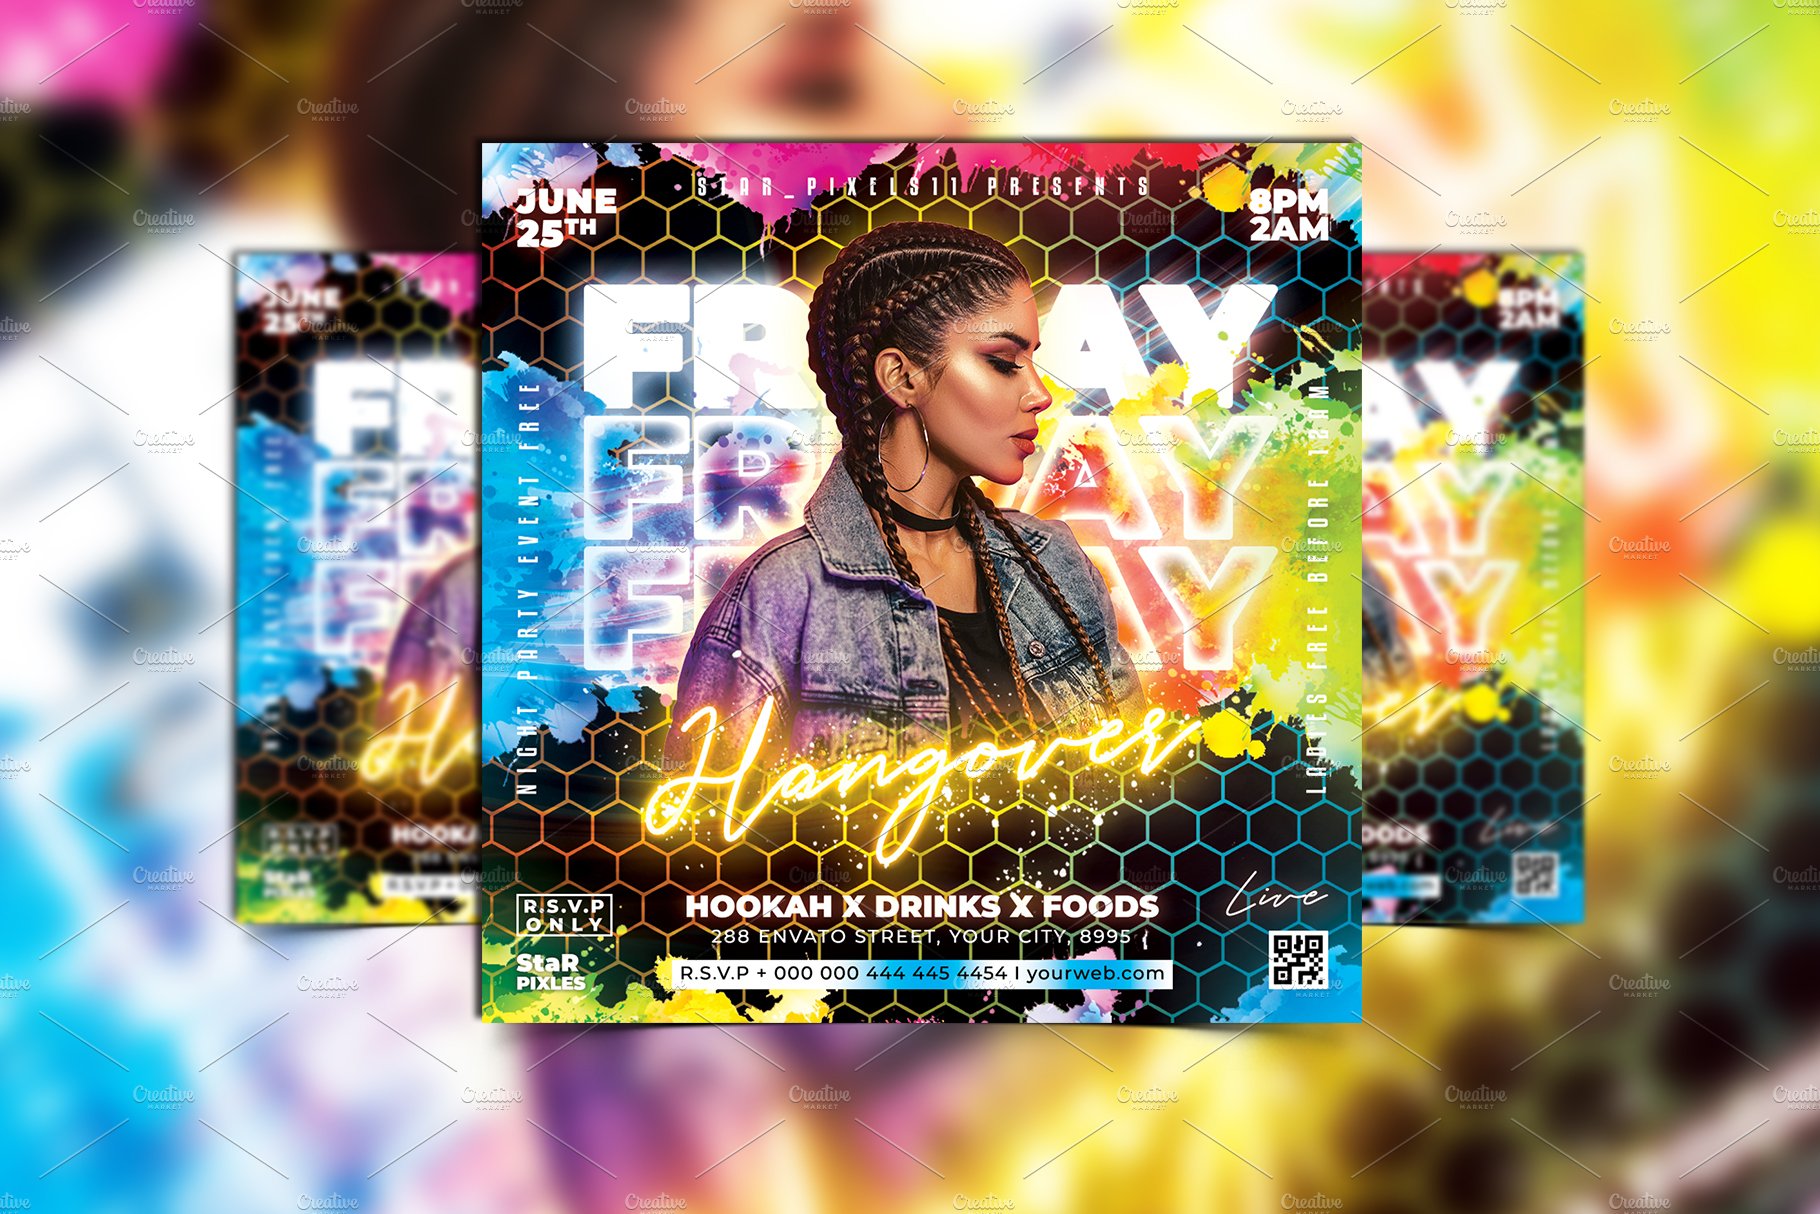 Night Club Flyer Template cover image.